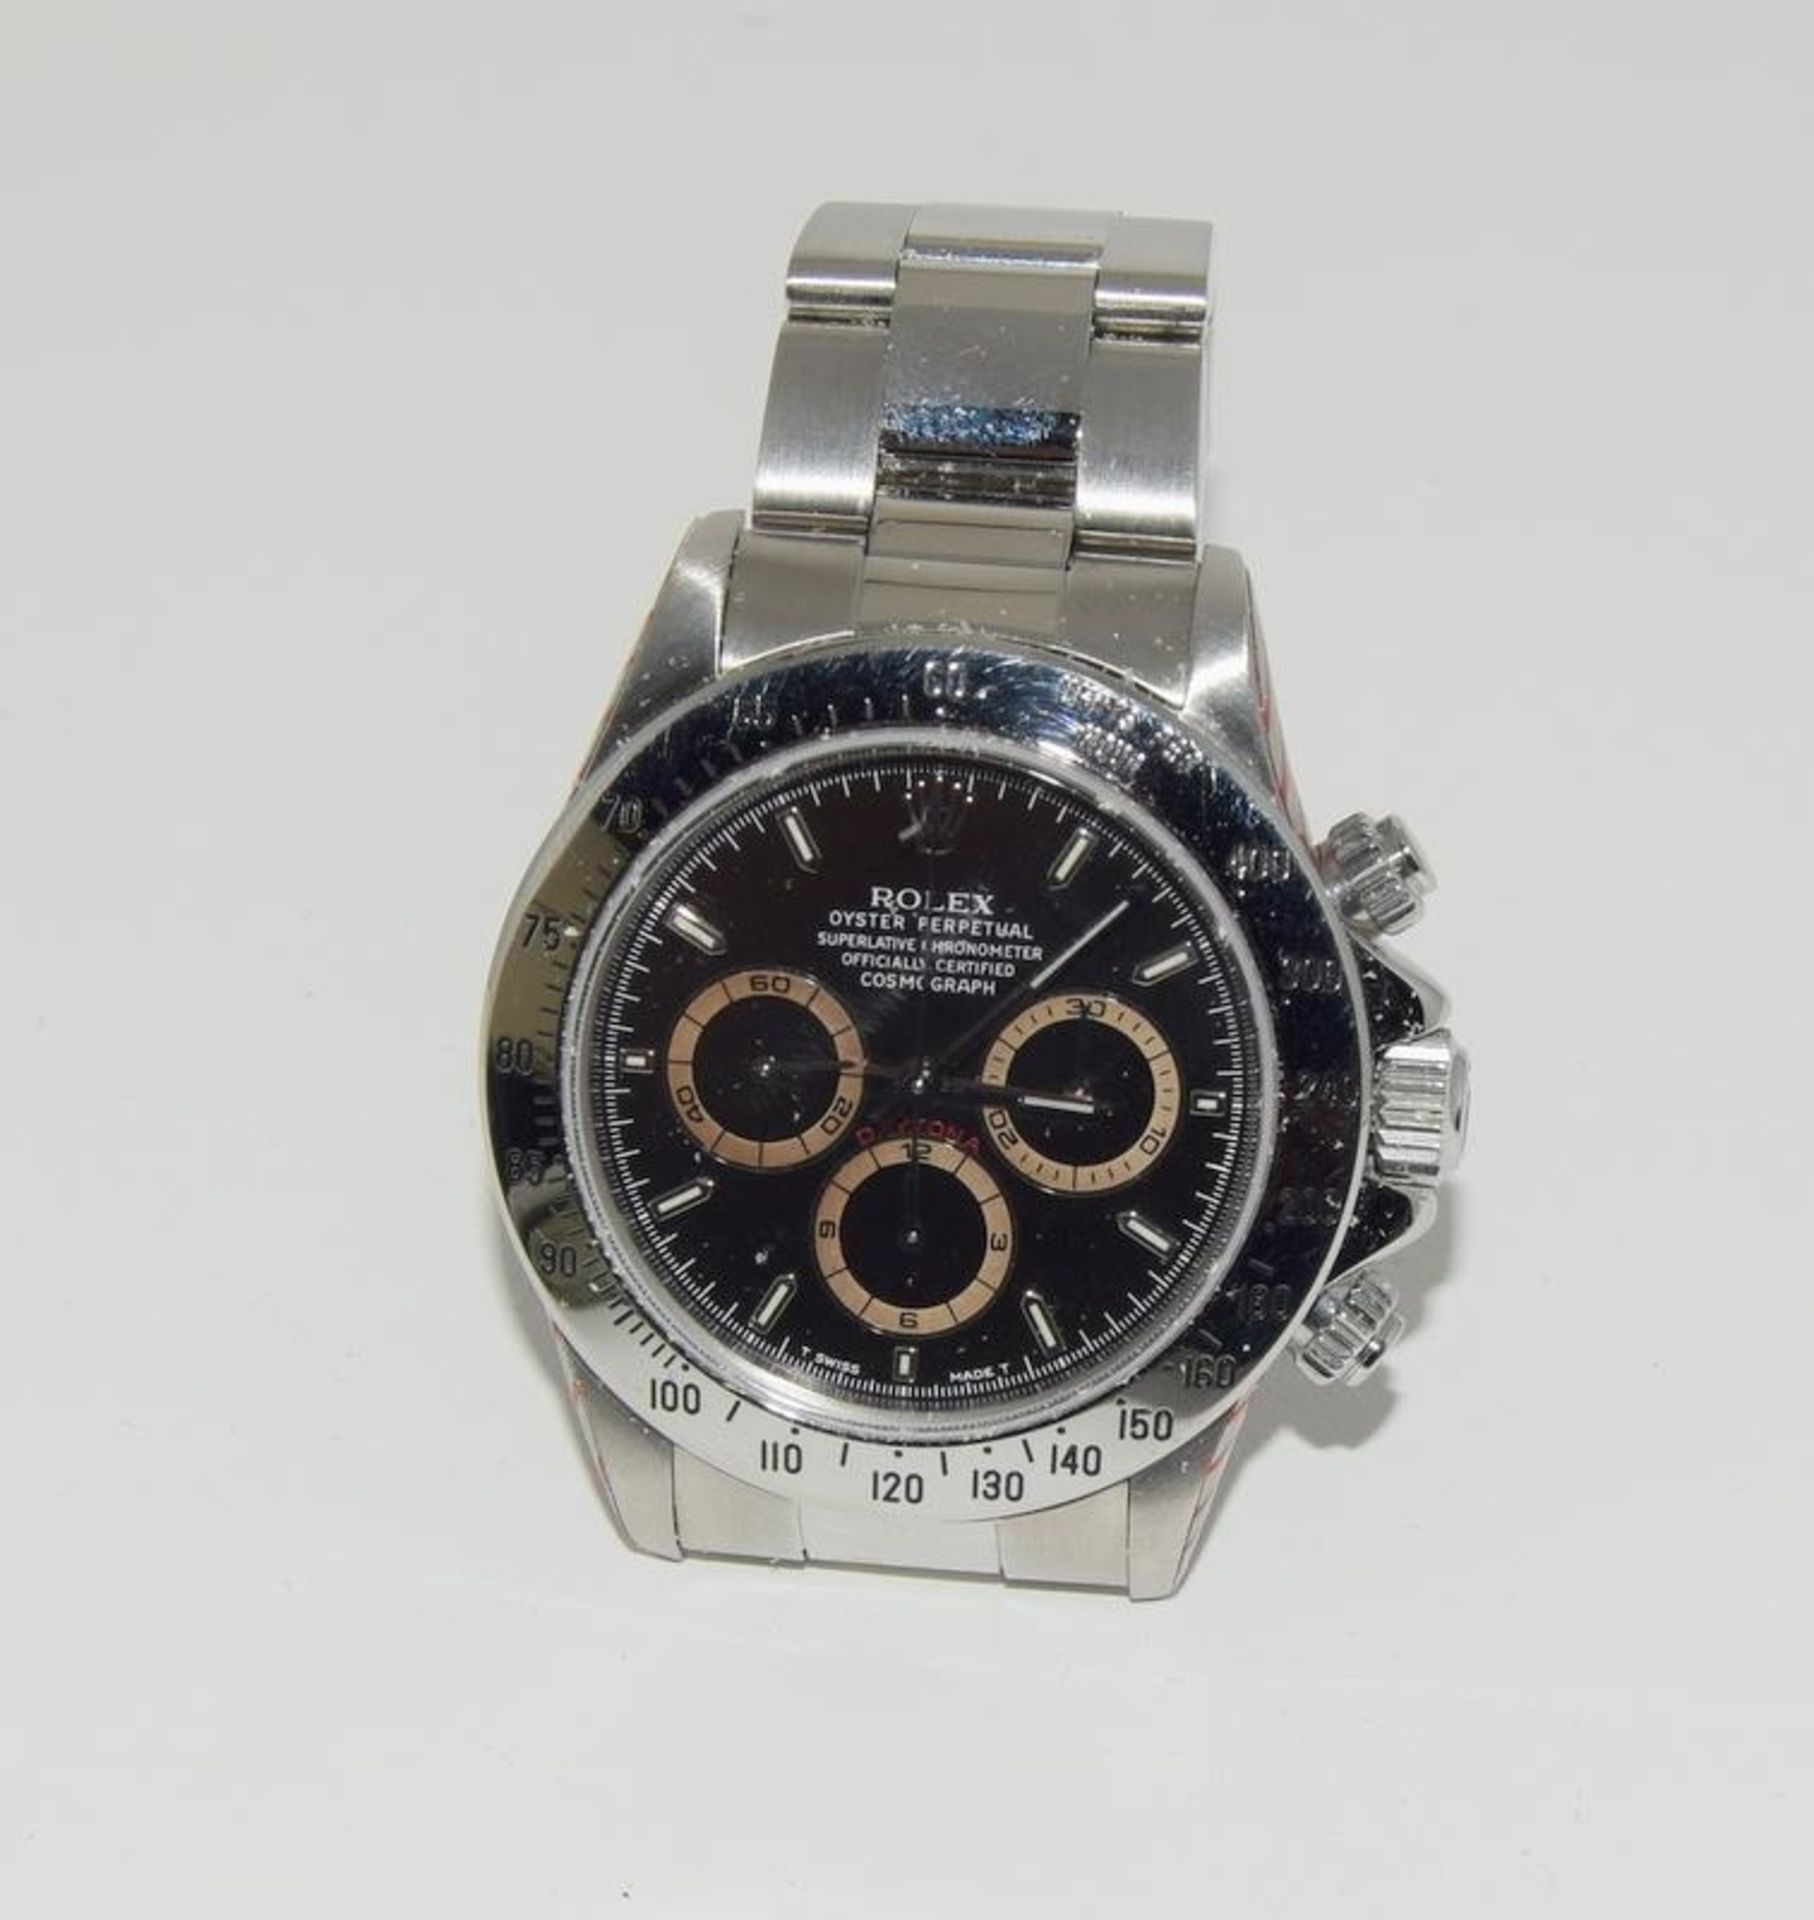 1997 Rolex Stainless steel Daytona with black dial, Model no. 16520, Box and Papers. (ref 16) - Image 9 of 10